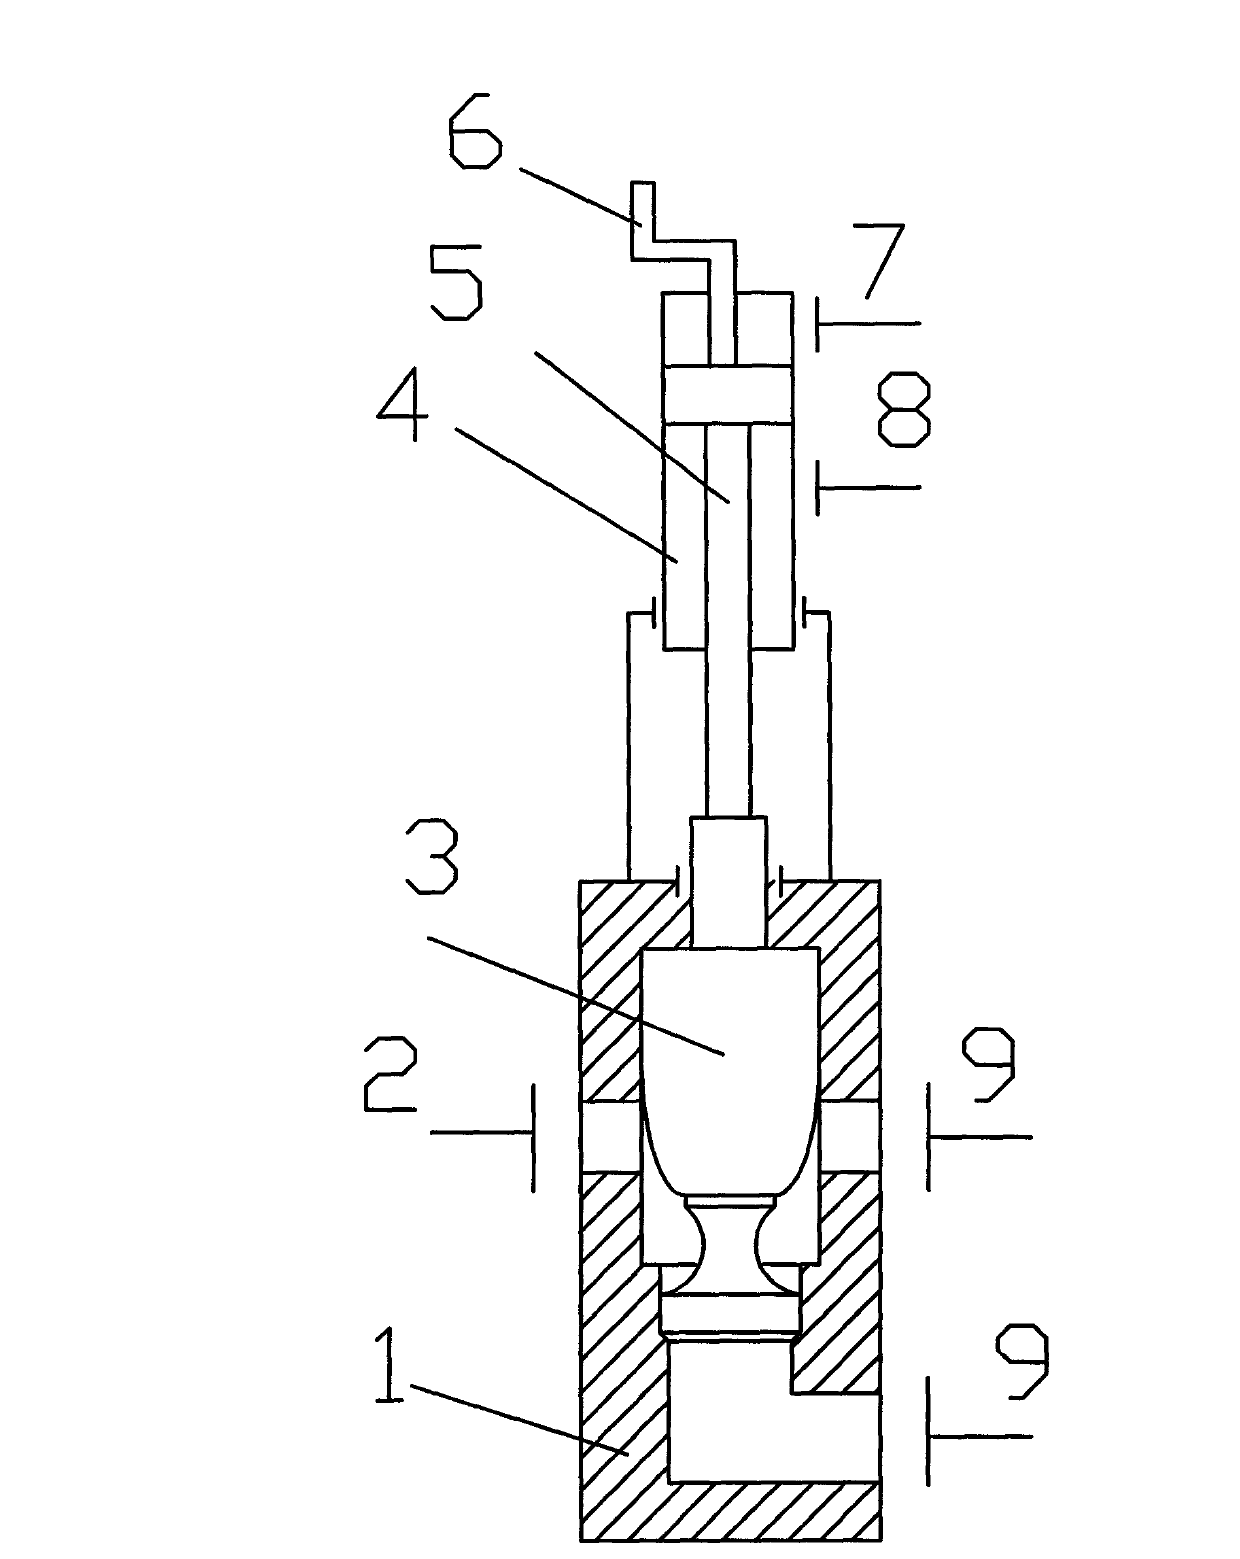 Control method of opening of large flow throttle valve for water